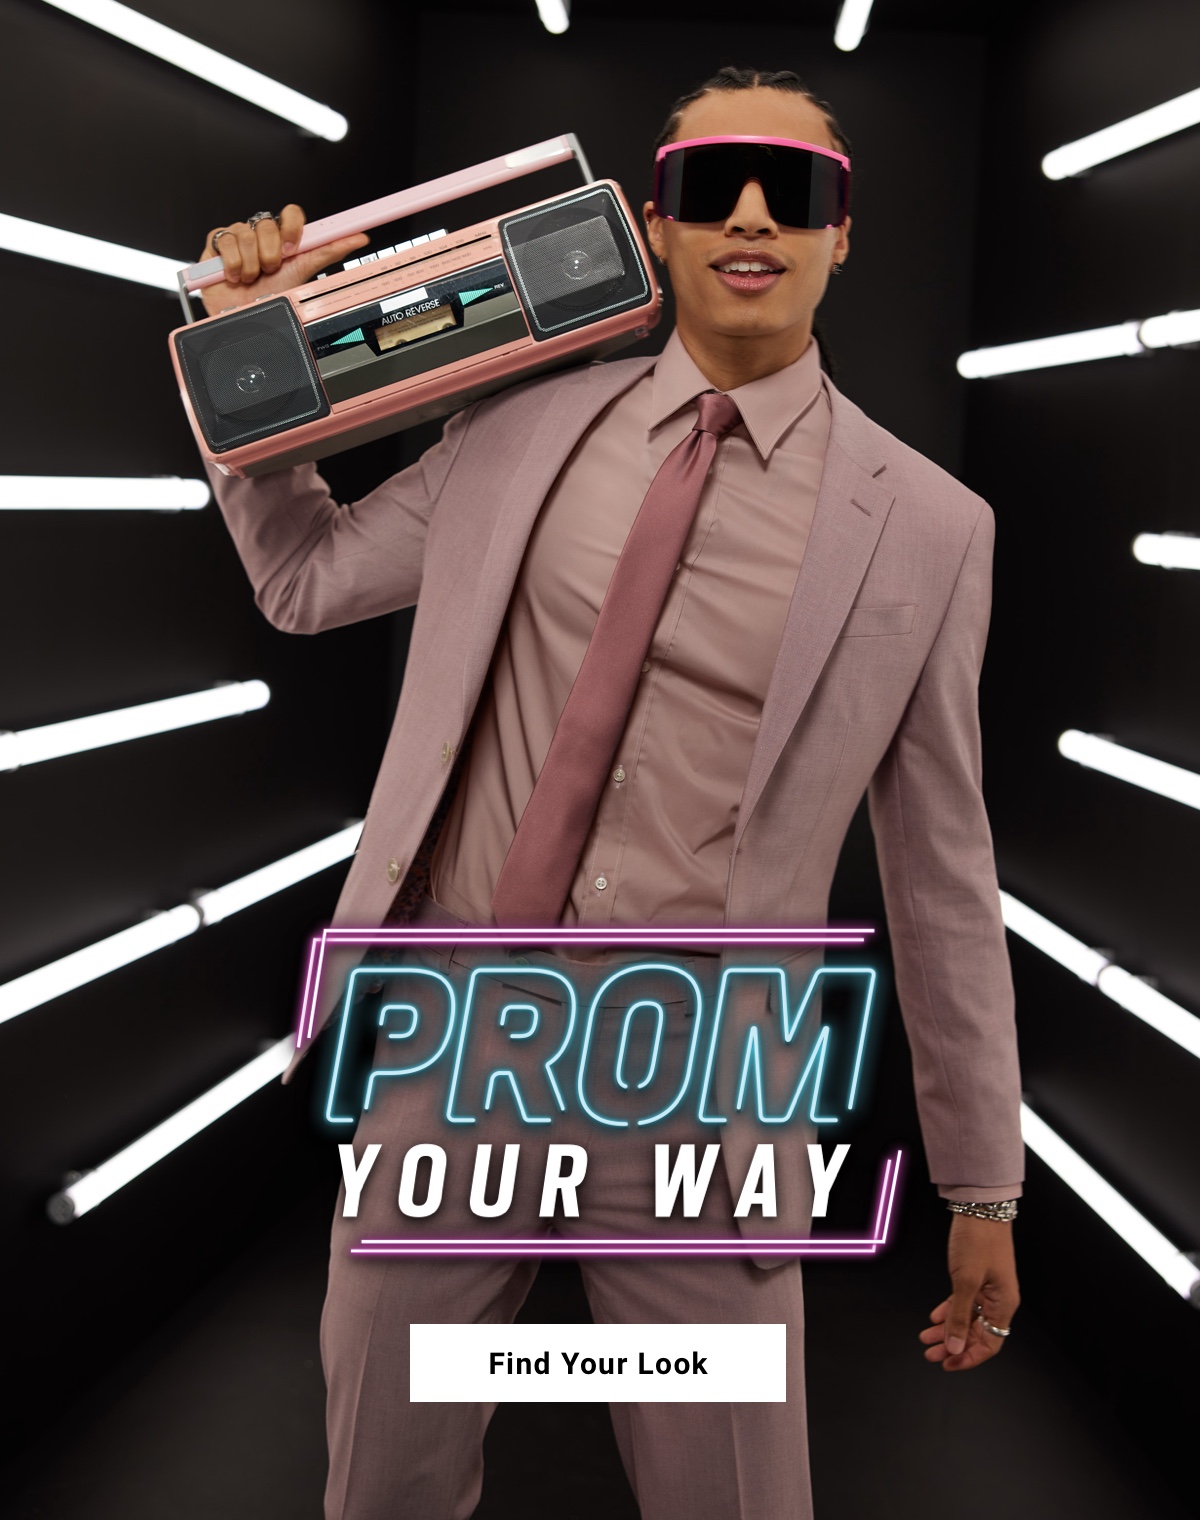 Prom Your Way Find Your Look